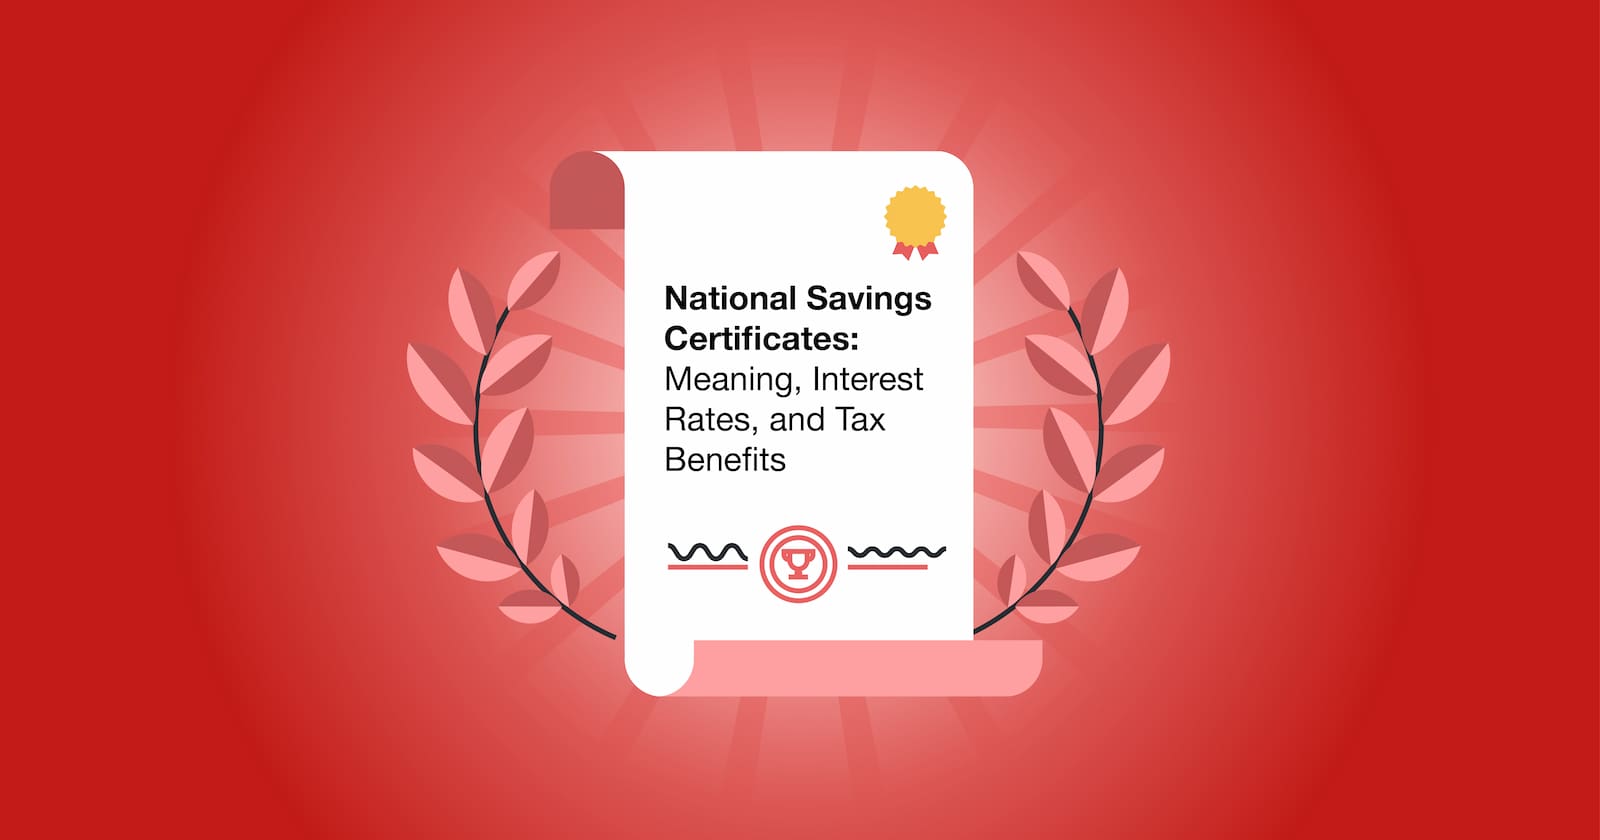 National Savings Certificates: Meaning Interest Rates and Tax Benefits